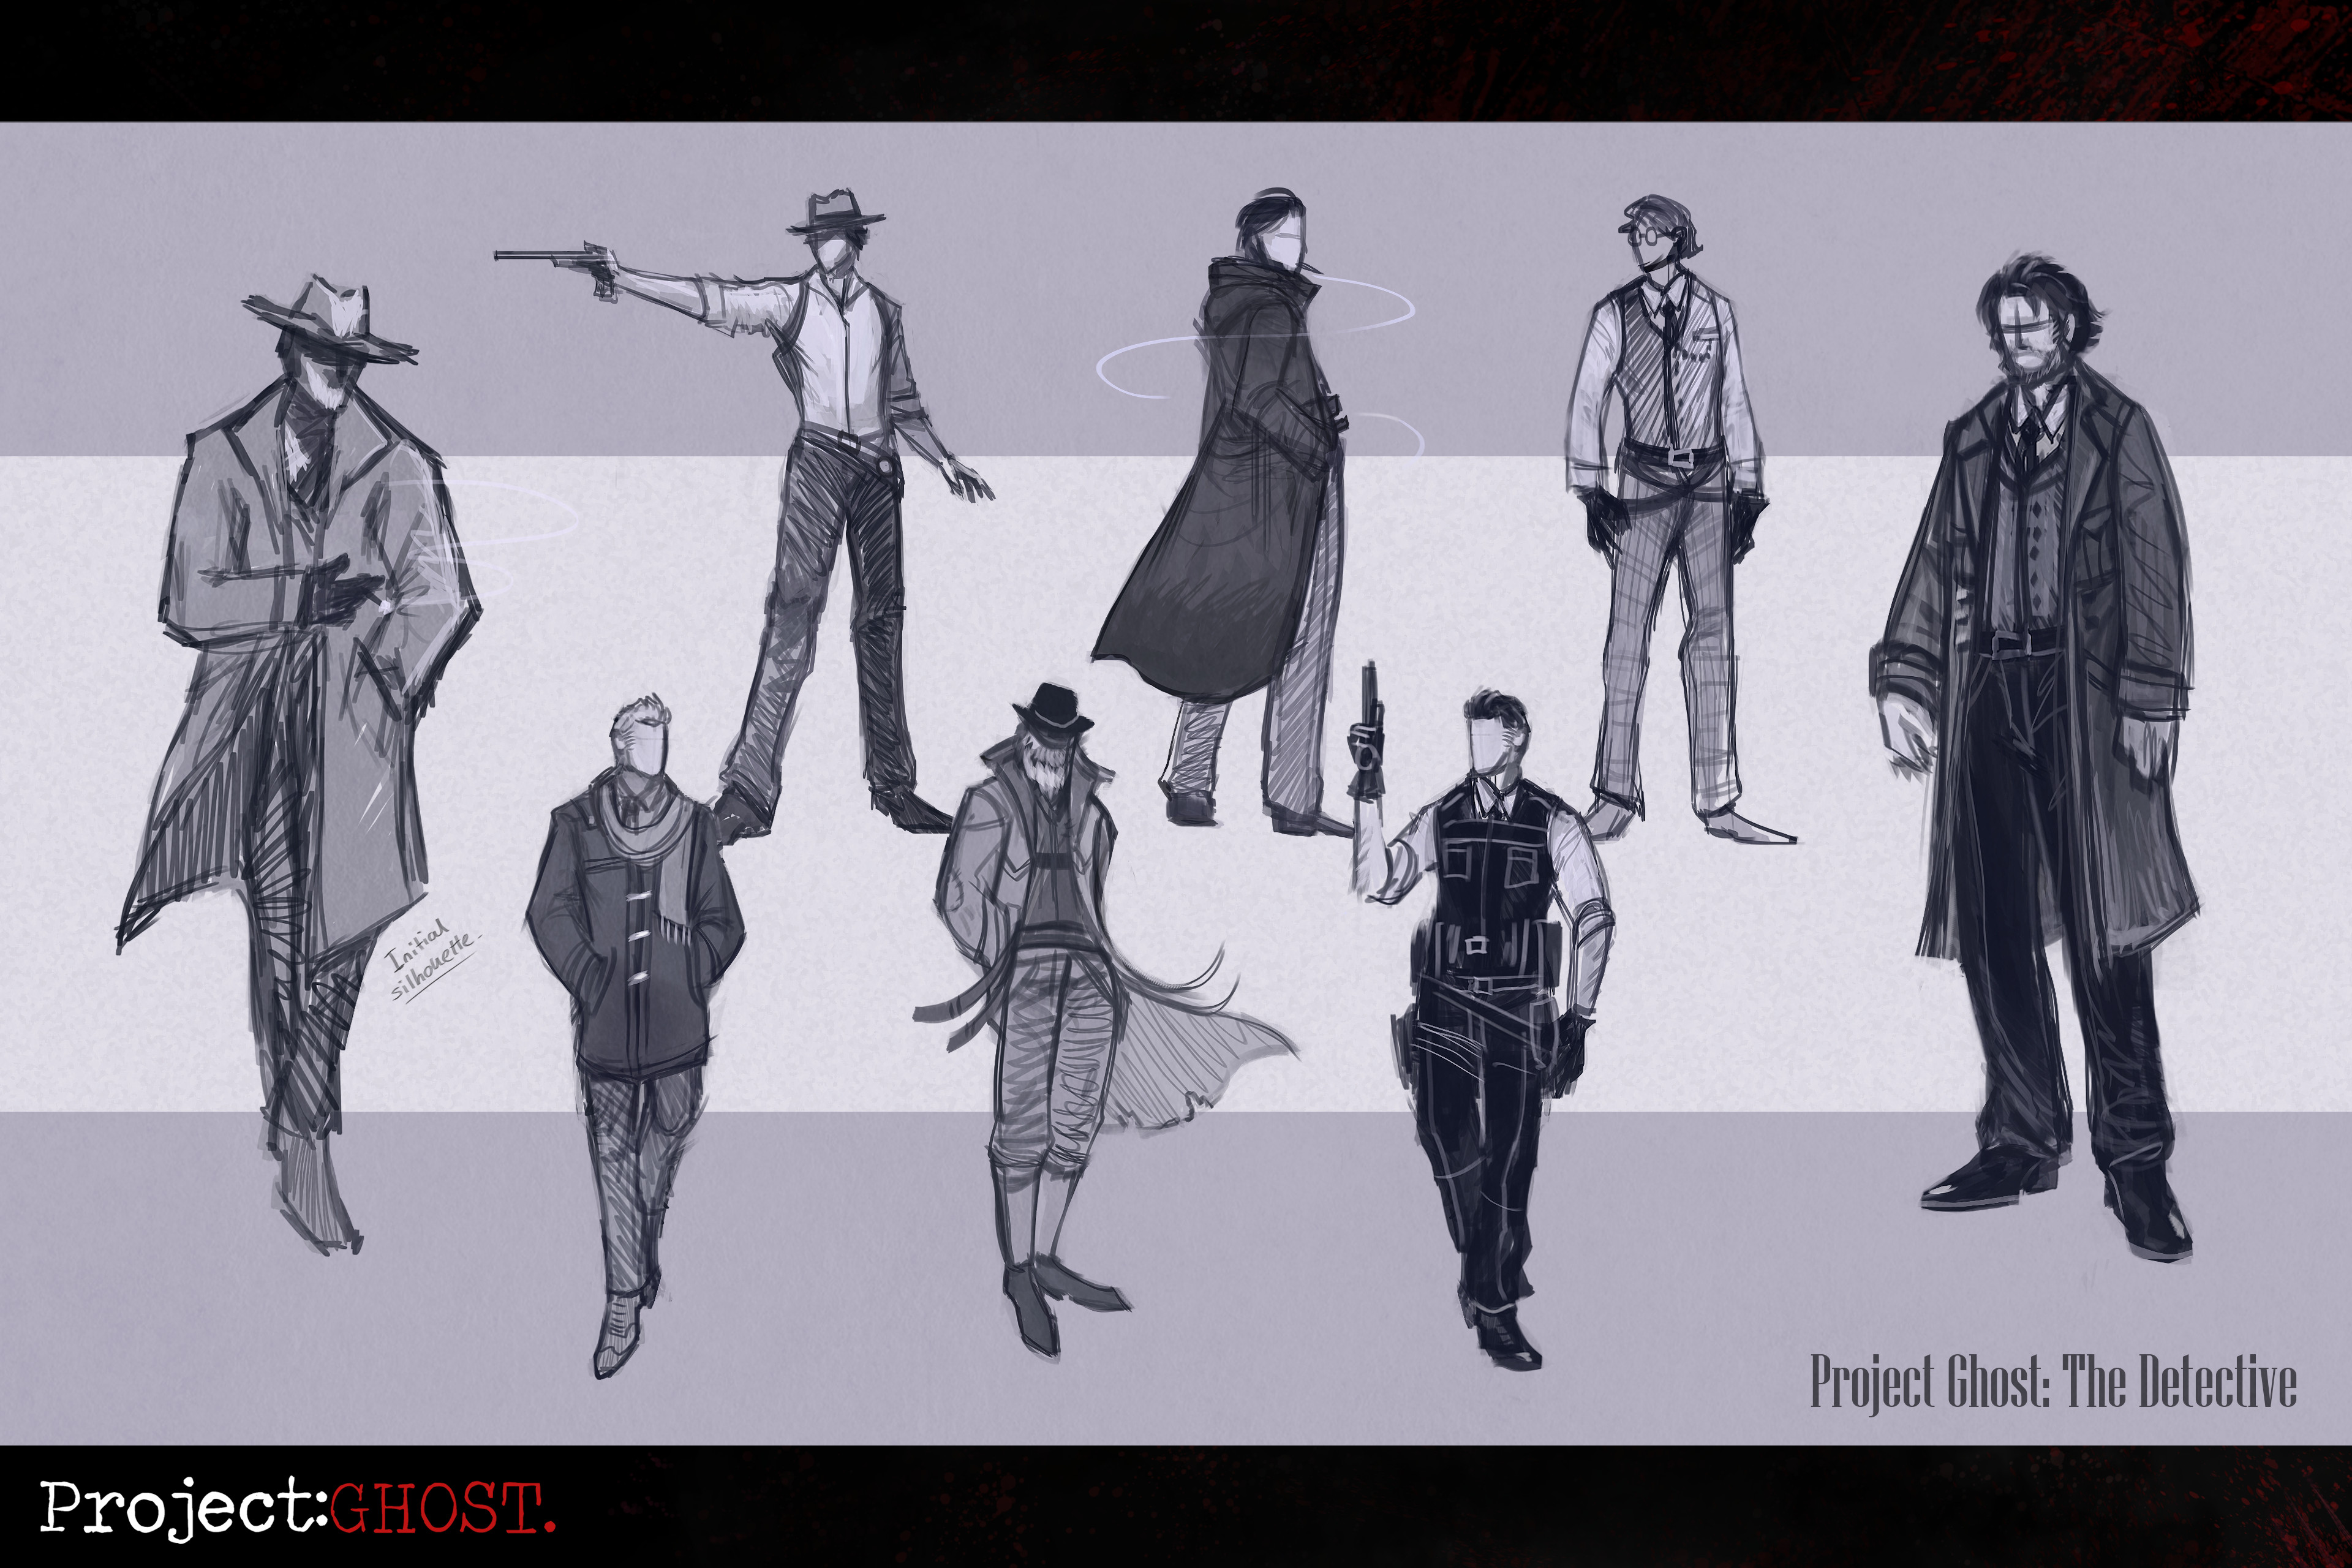 Peter Roberts: Initial rough sketches/thumbnails for design/clothing options and character exploration.